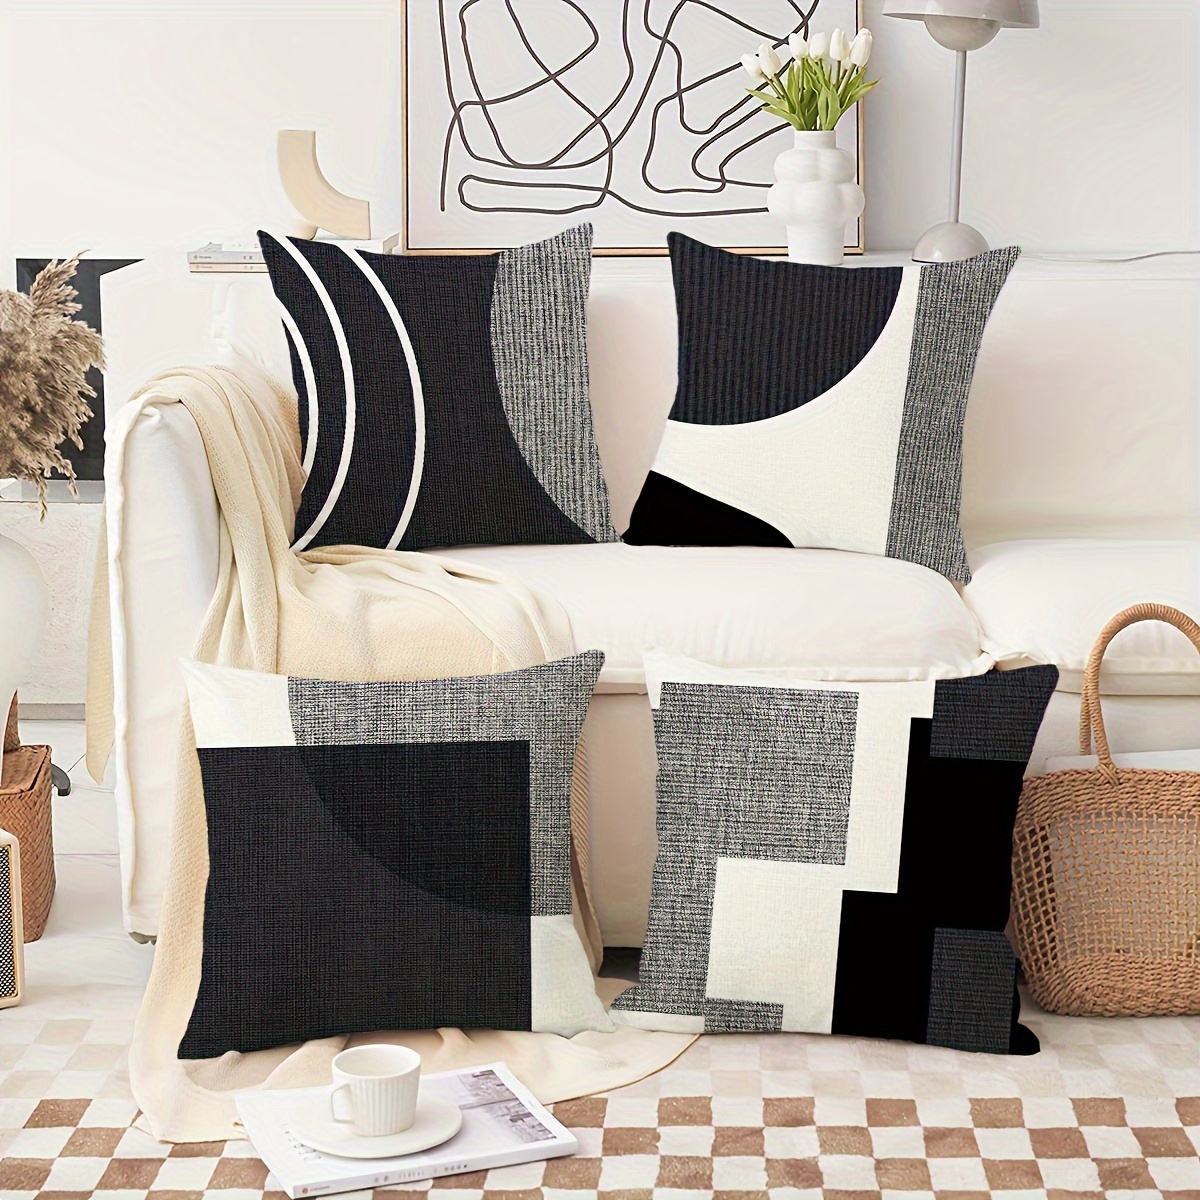 

4-piece Set Abstract Geometric Throw Pillow Covers, 18x18 Inch, Modern Boho Black & White Decorative Cushion Cases For Sofa, Living Room, Porch - Hypoallergenic Polyester With Zipper Closure